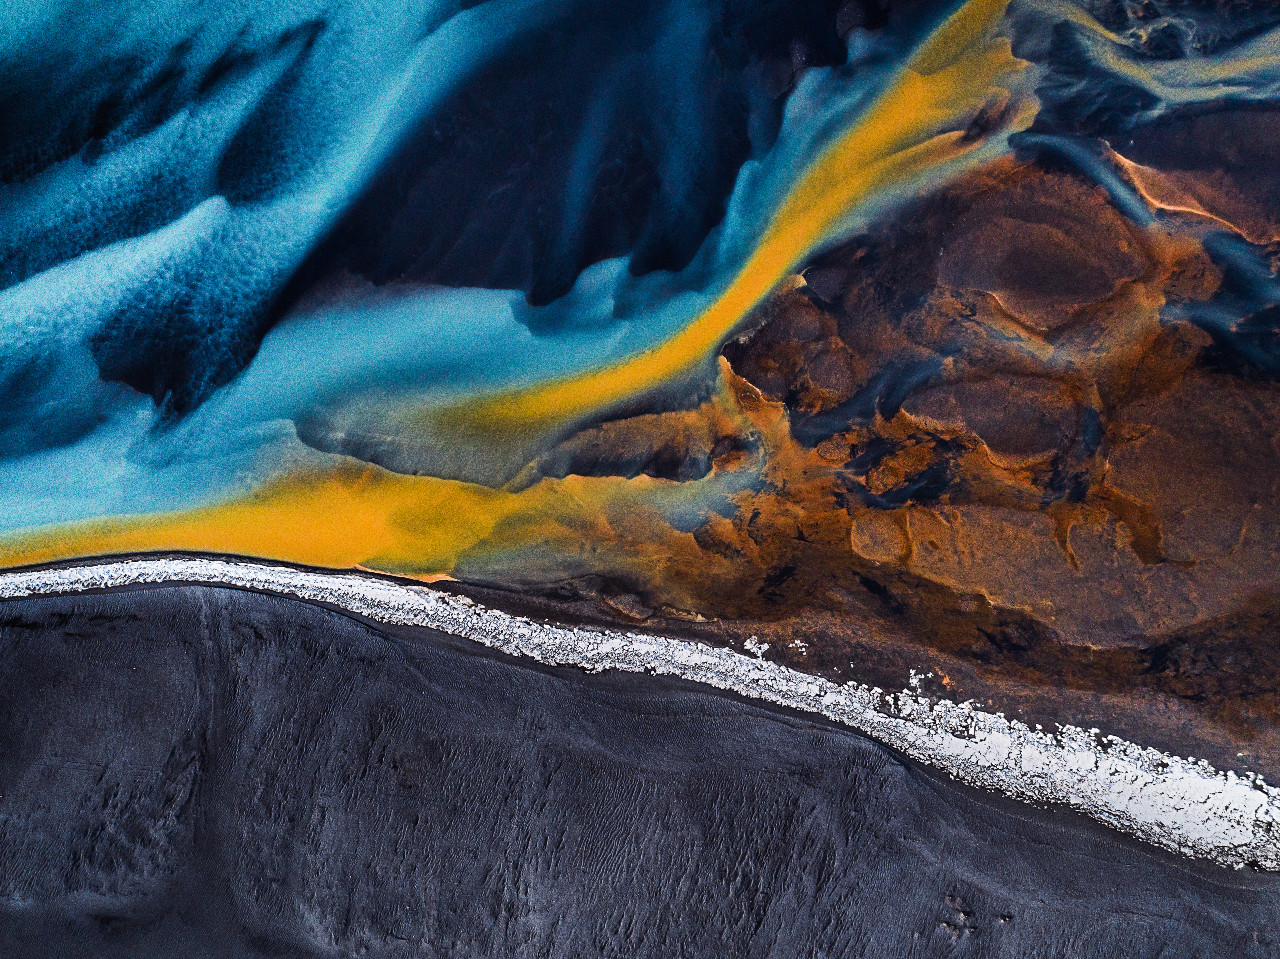 Aerial shot looking down on a braided river at the edge of a black sand beach